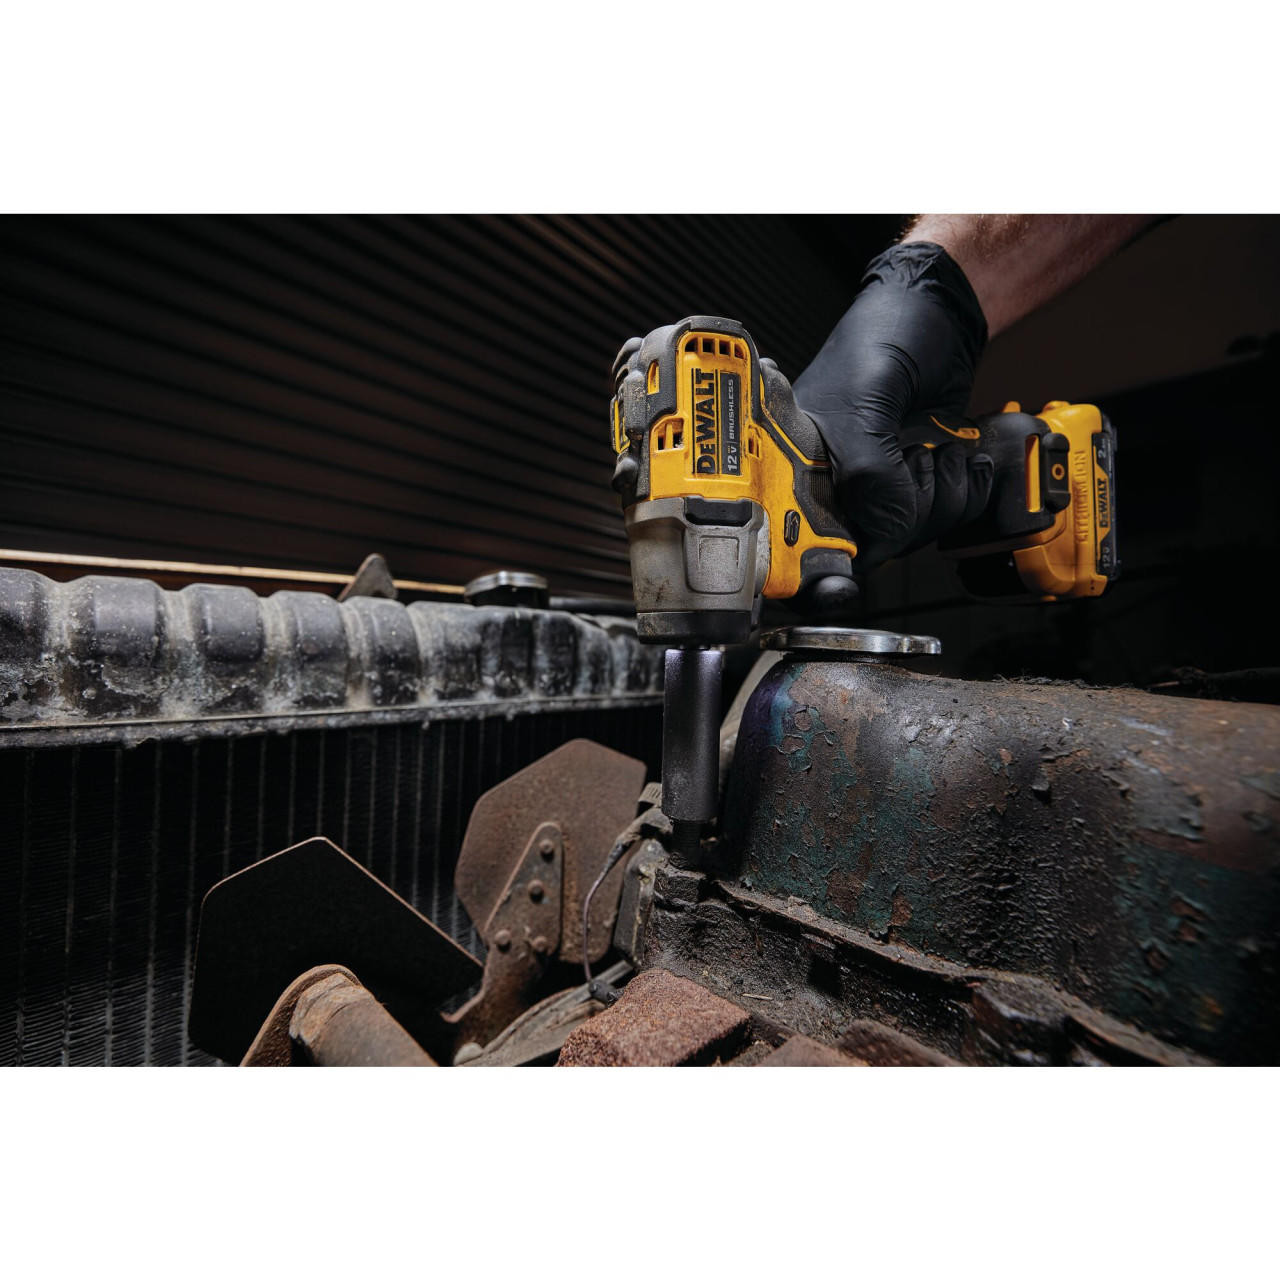 Dewalt DEWALT XTREME 12V MAX Brushless 3/8 in. Cordless Impact Wrench (Tool Only) DCF902B 